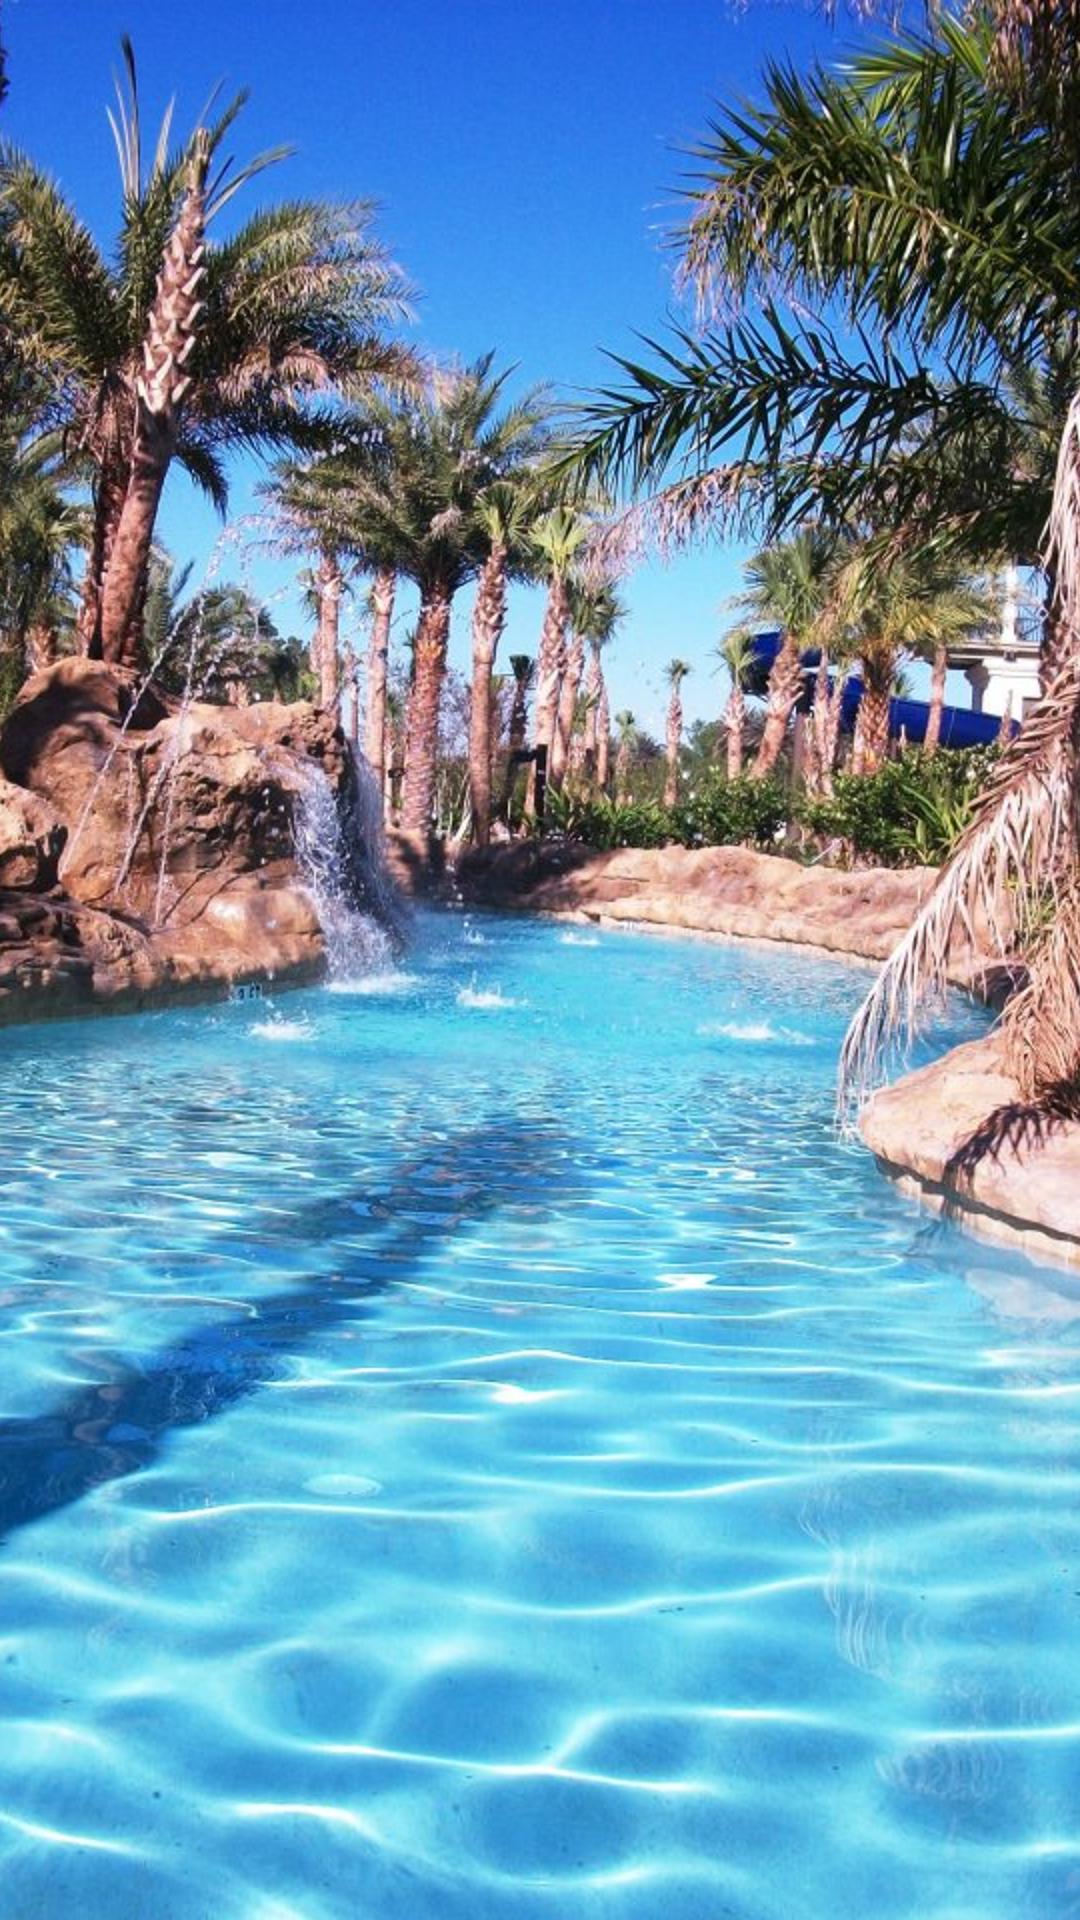 Relax in the lazy river